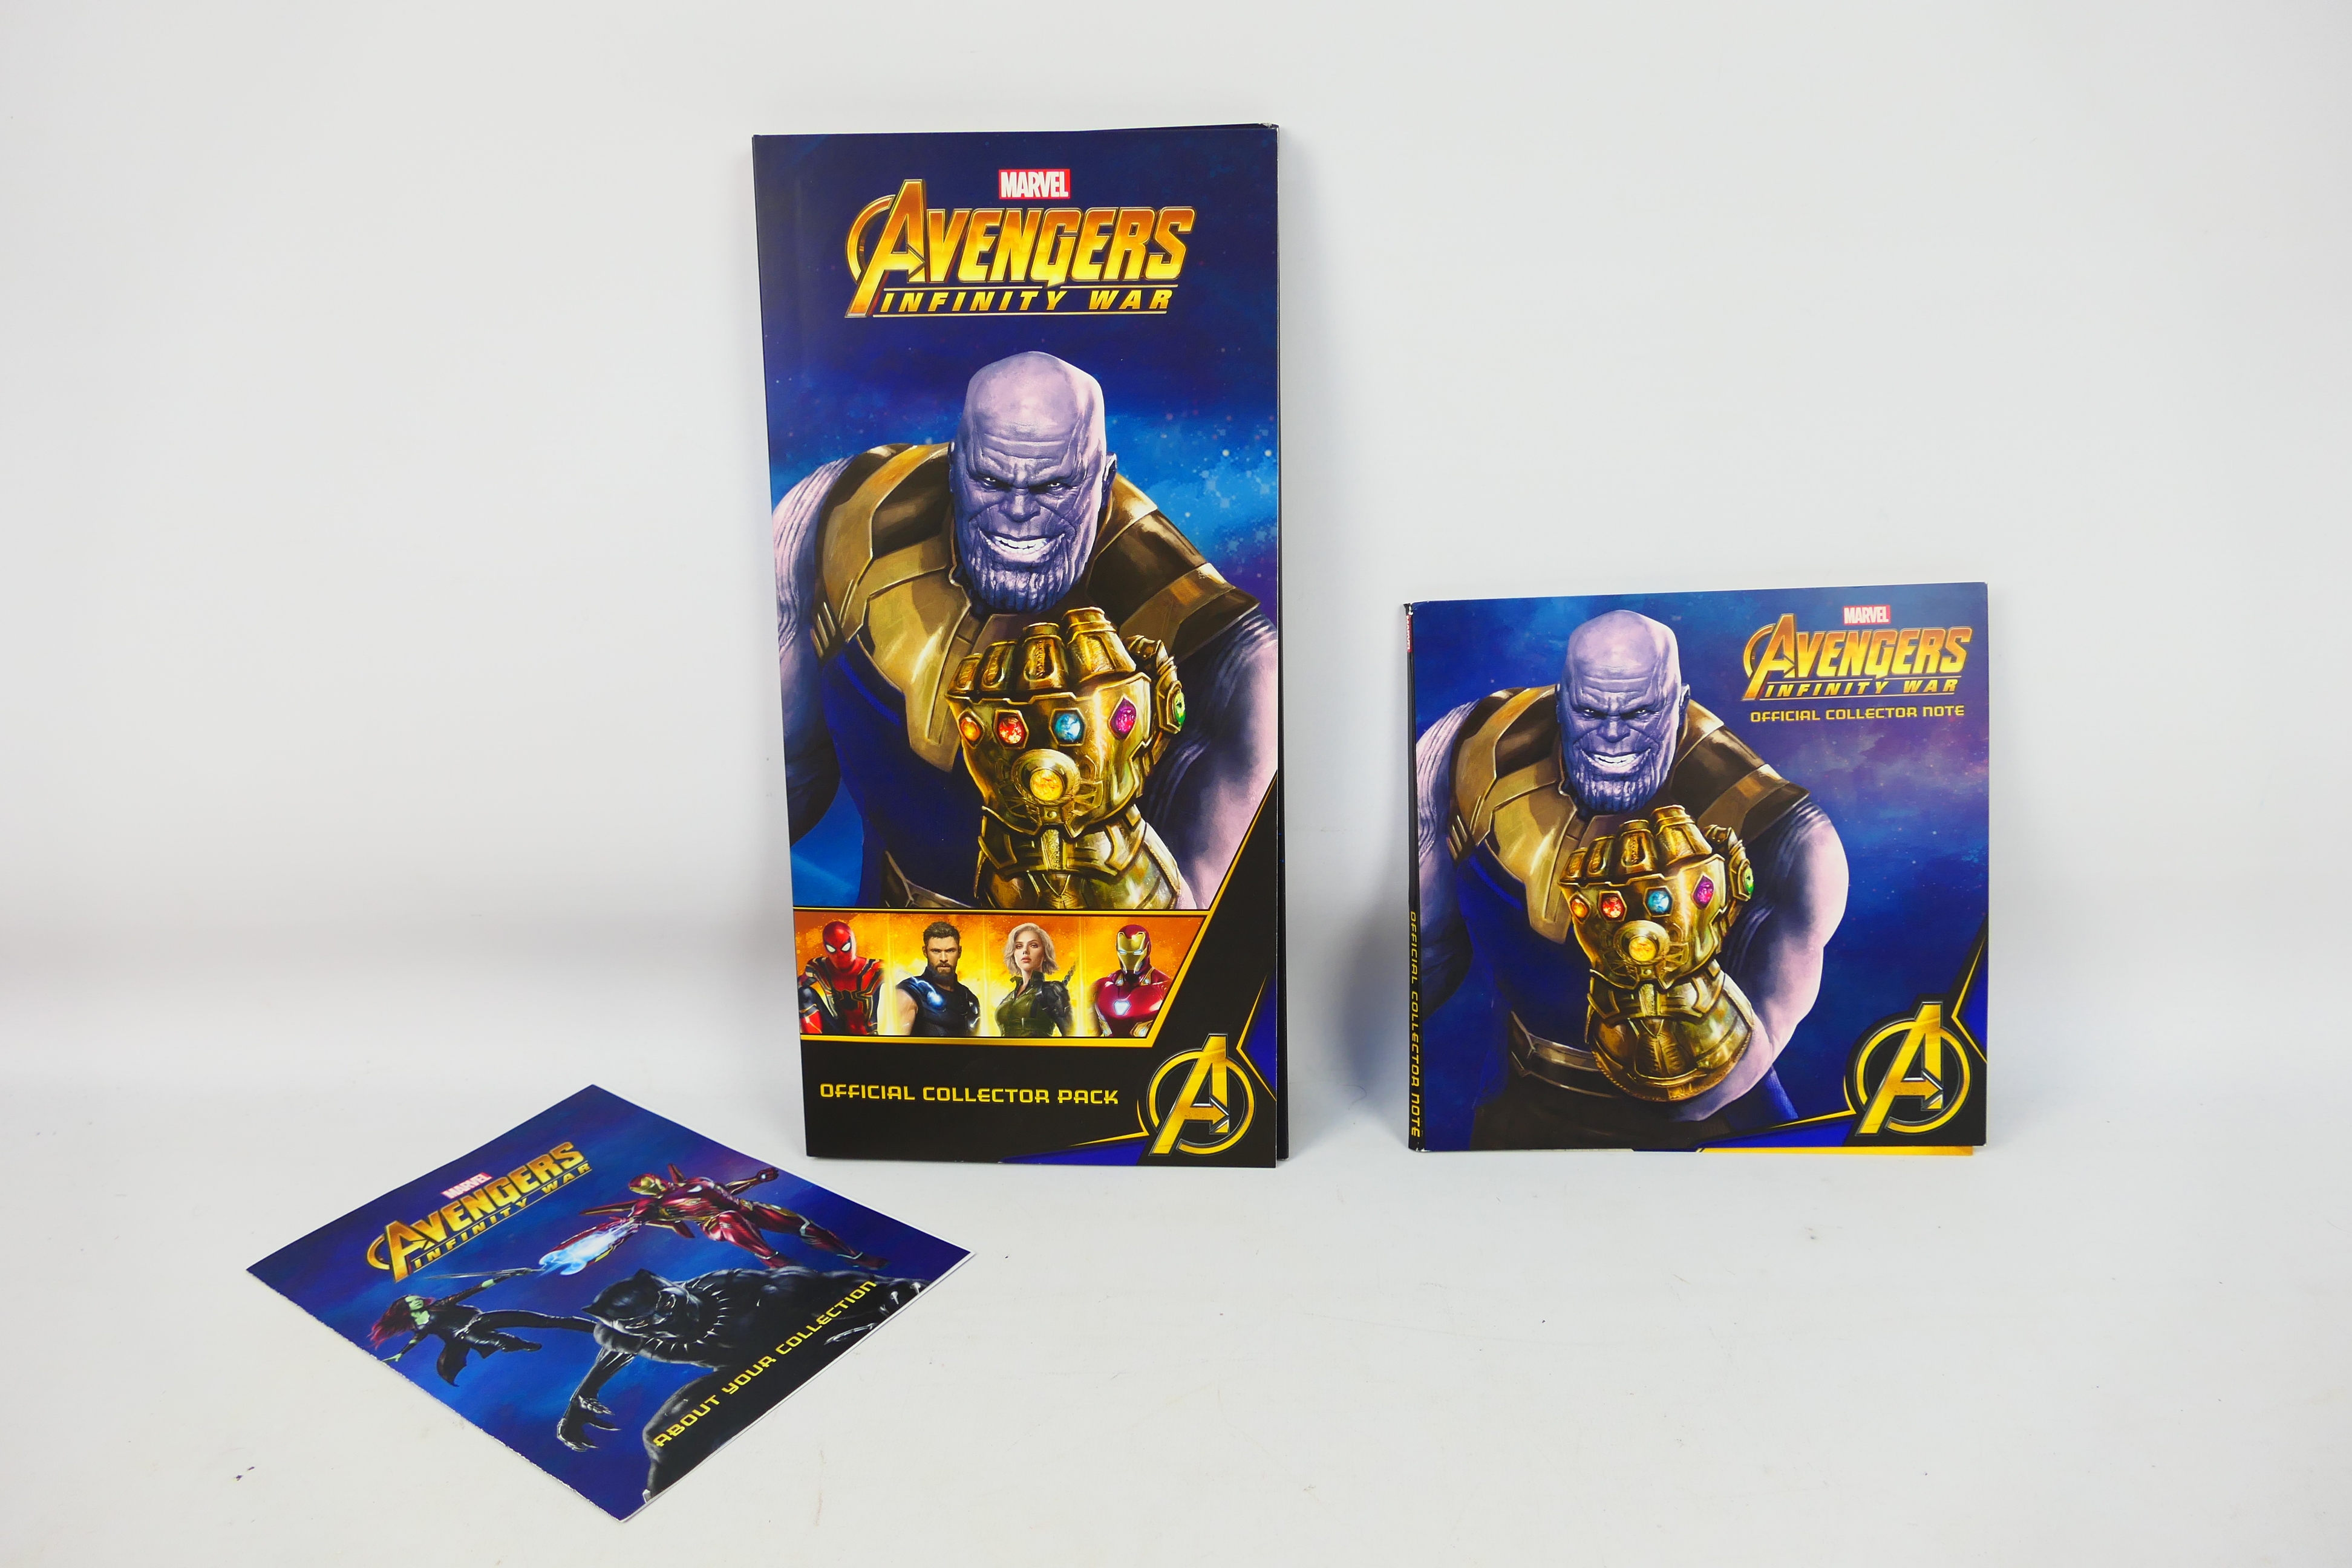 Marvel - An Avengers Infinity War Official Collector Pack comprising 15 commemorative coins and an